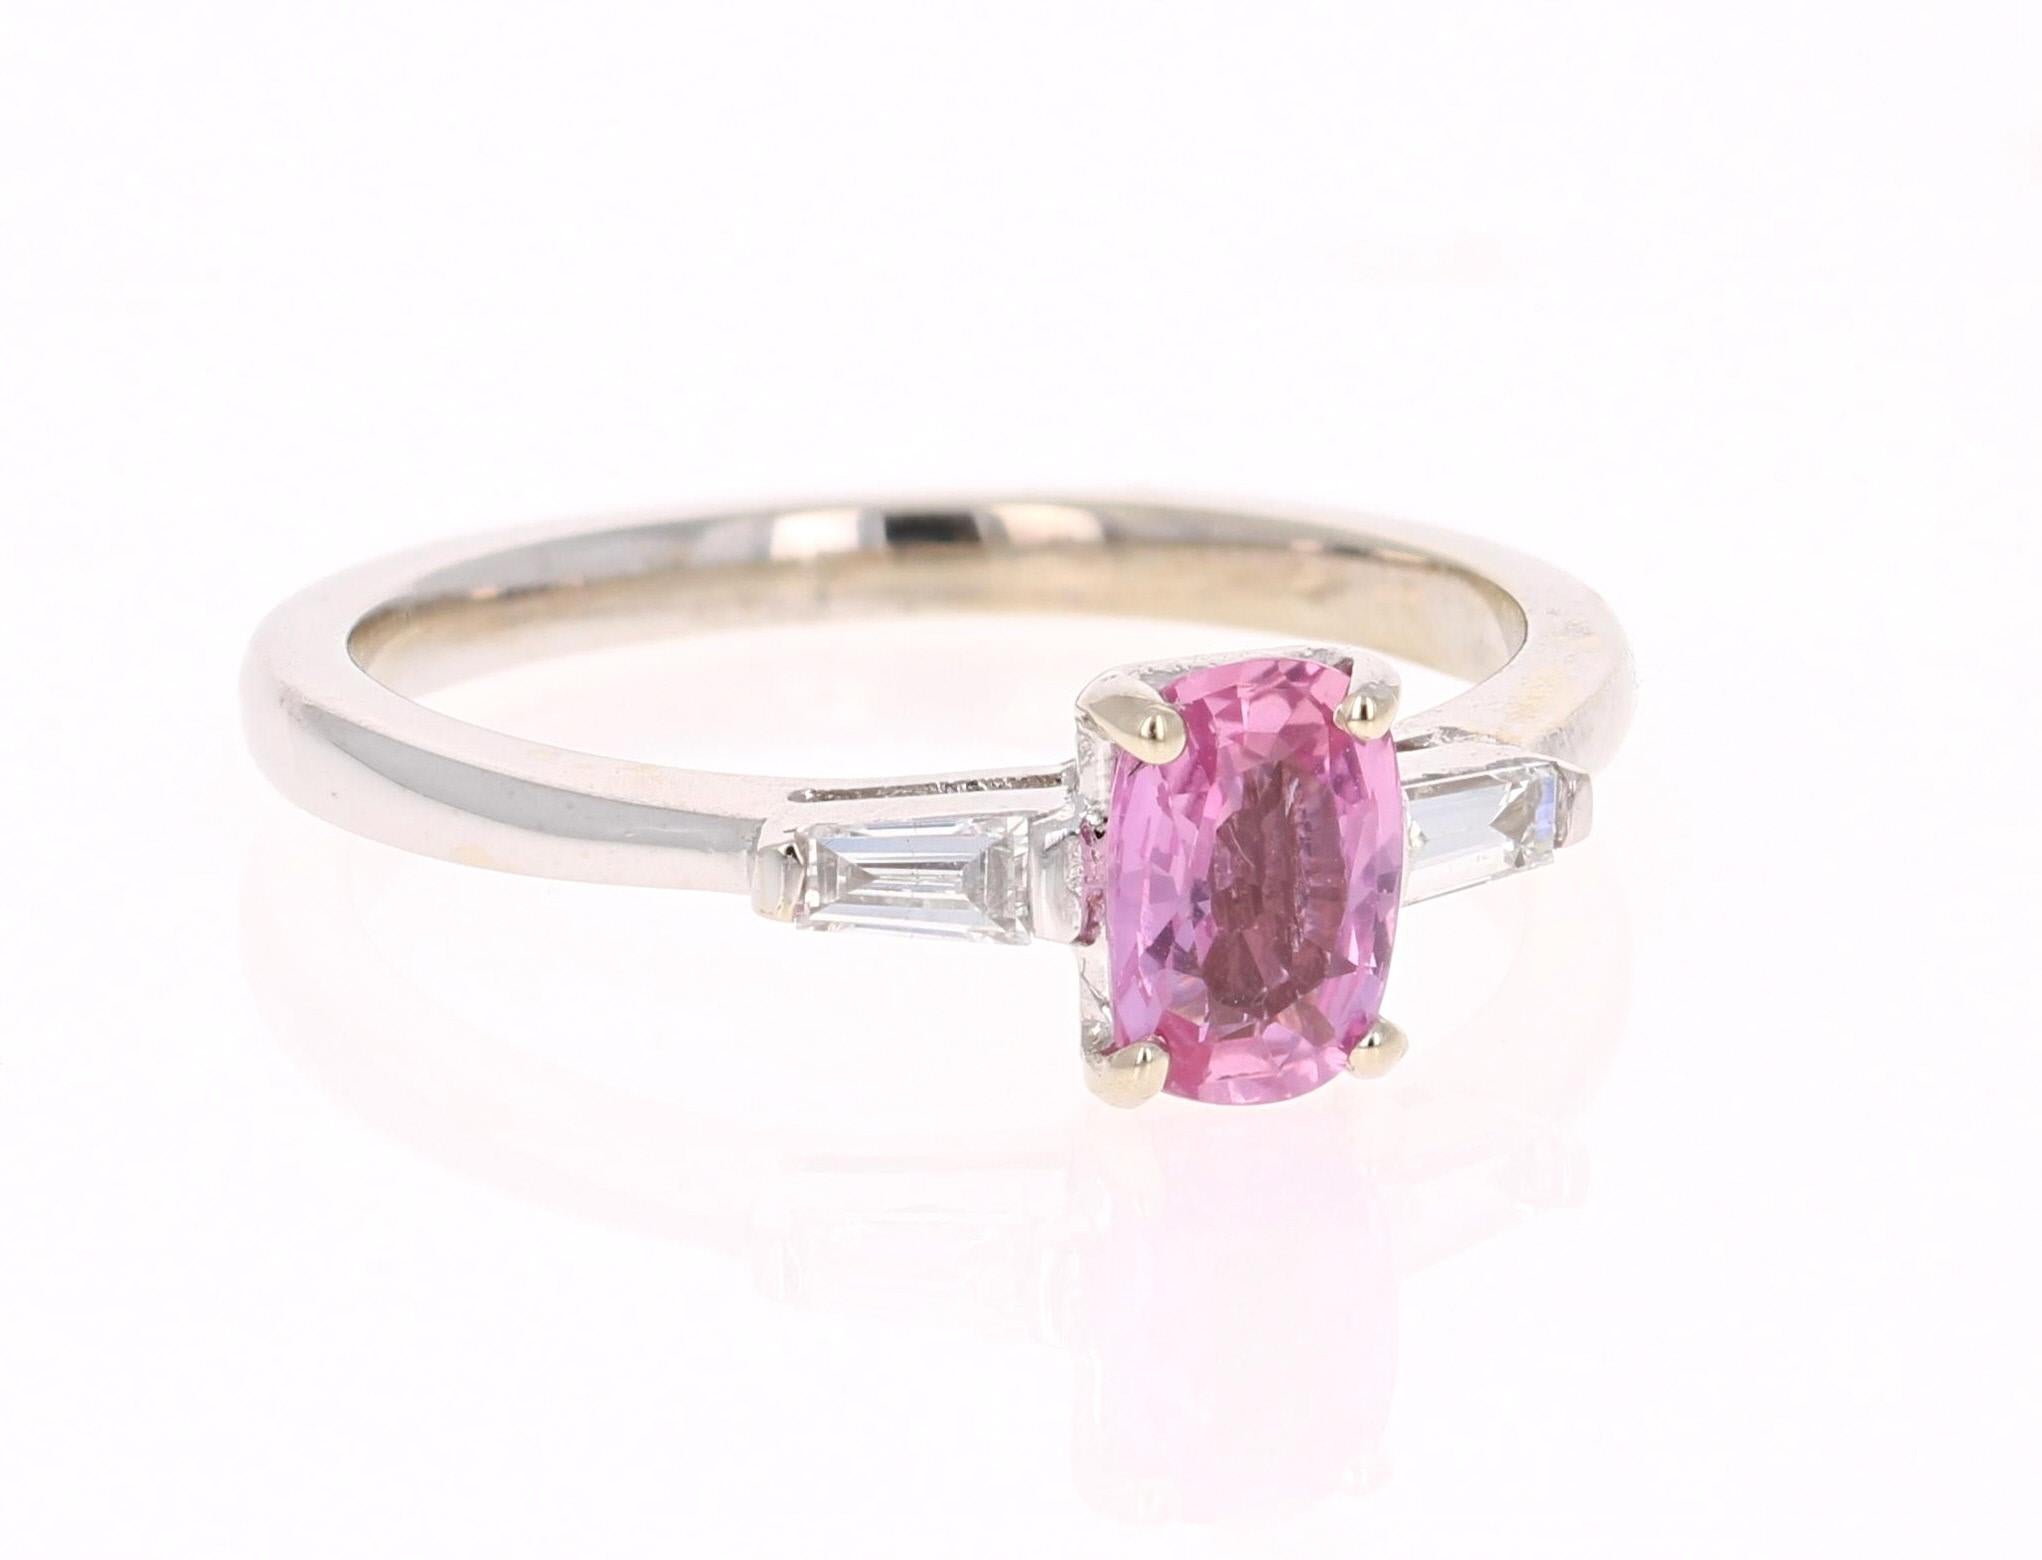 Cute Pink Sapphire and Baguette Cut Diamond Ring! 
The center Oval Cut Pink Sapphire is 0.82 Carats and is embellished with 2 Baguette Cut Diamonds weighing 0.17 Carats. The clarity and color of the diamonds are VS-H. The total carat weight of the